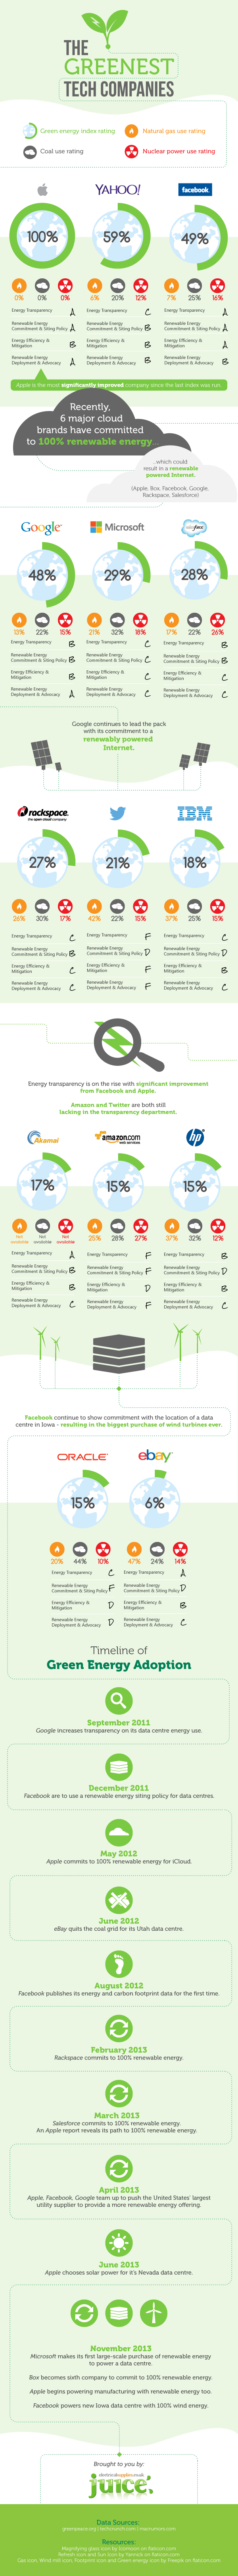 Greenest tech companies infographic by Juice Electrical Supplies